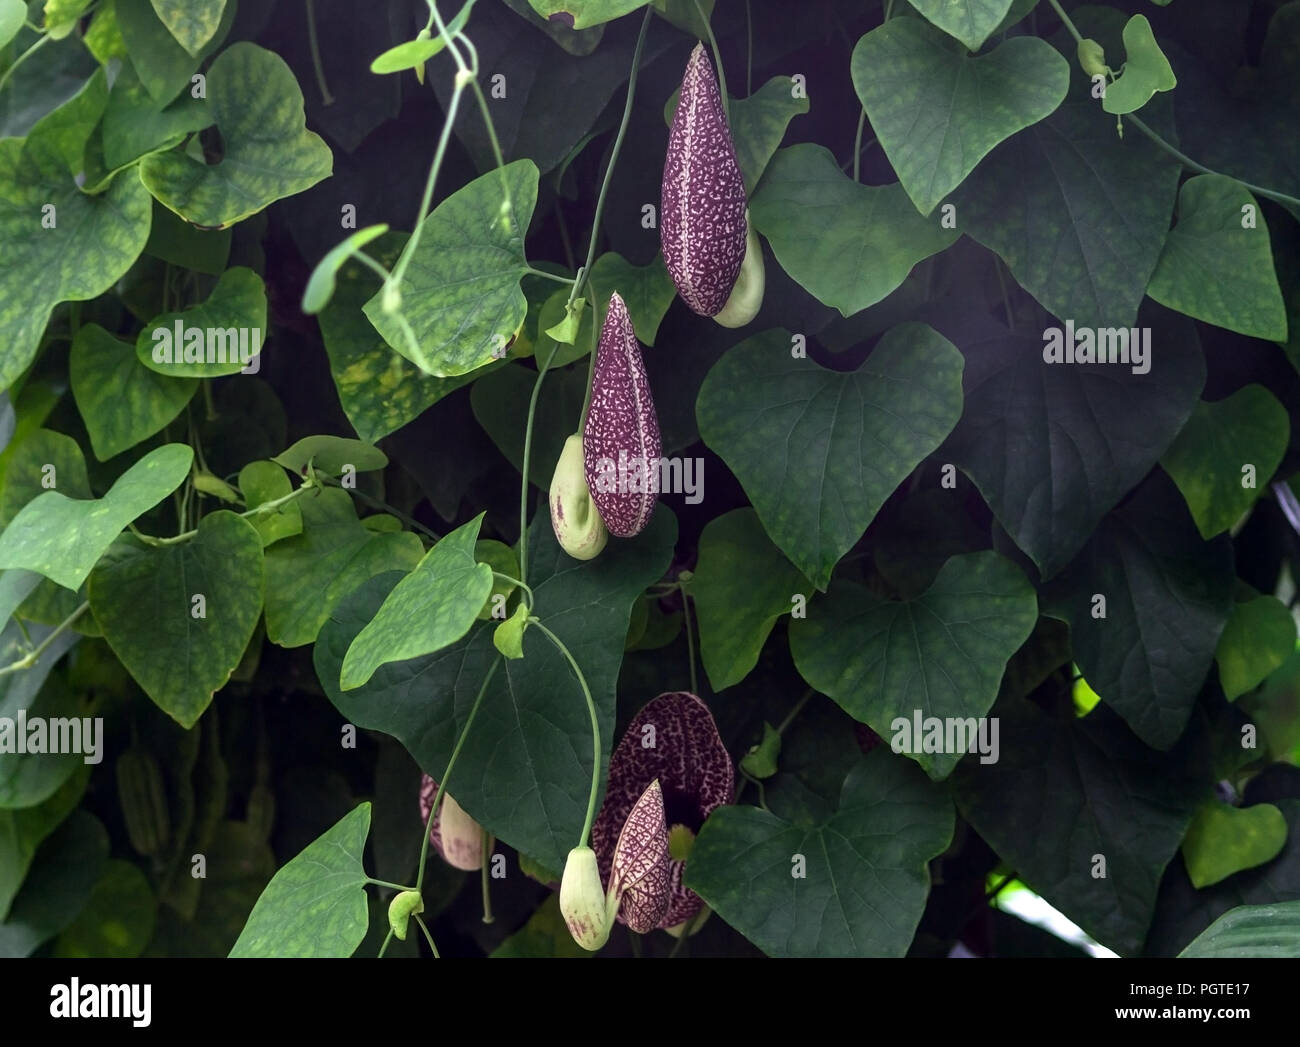 aristolochia macrophylla, shrubby liana in a garden, one large flower and several small, green leaves Stock Photo